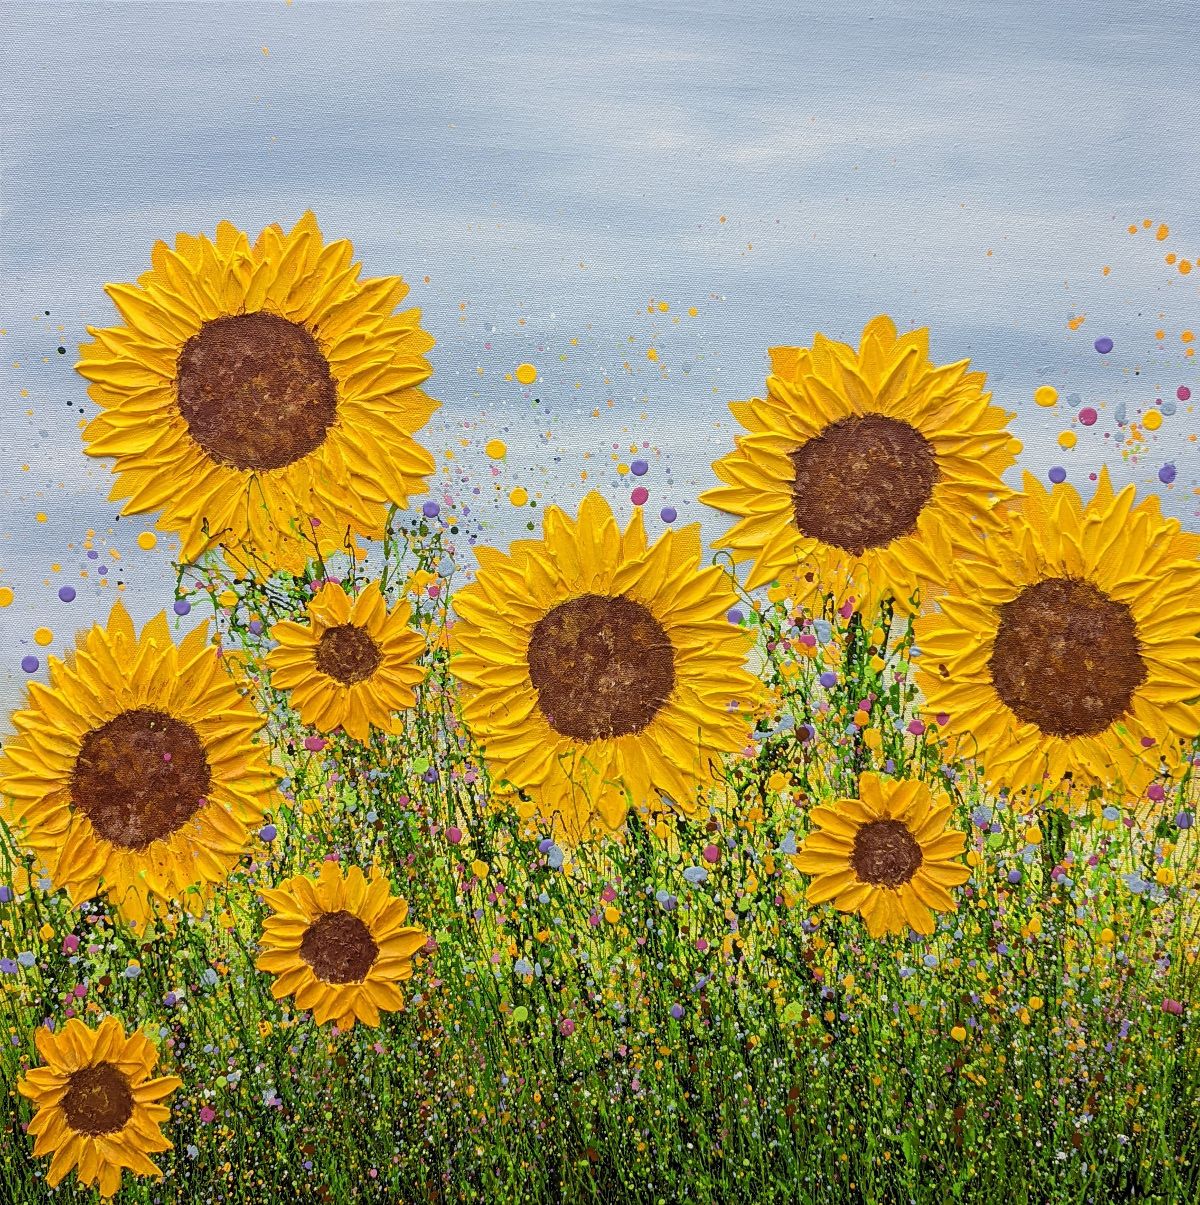 Say It With Sunflowers by Lucy Moore